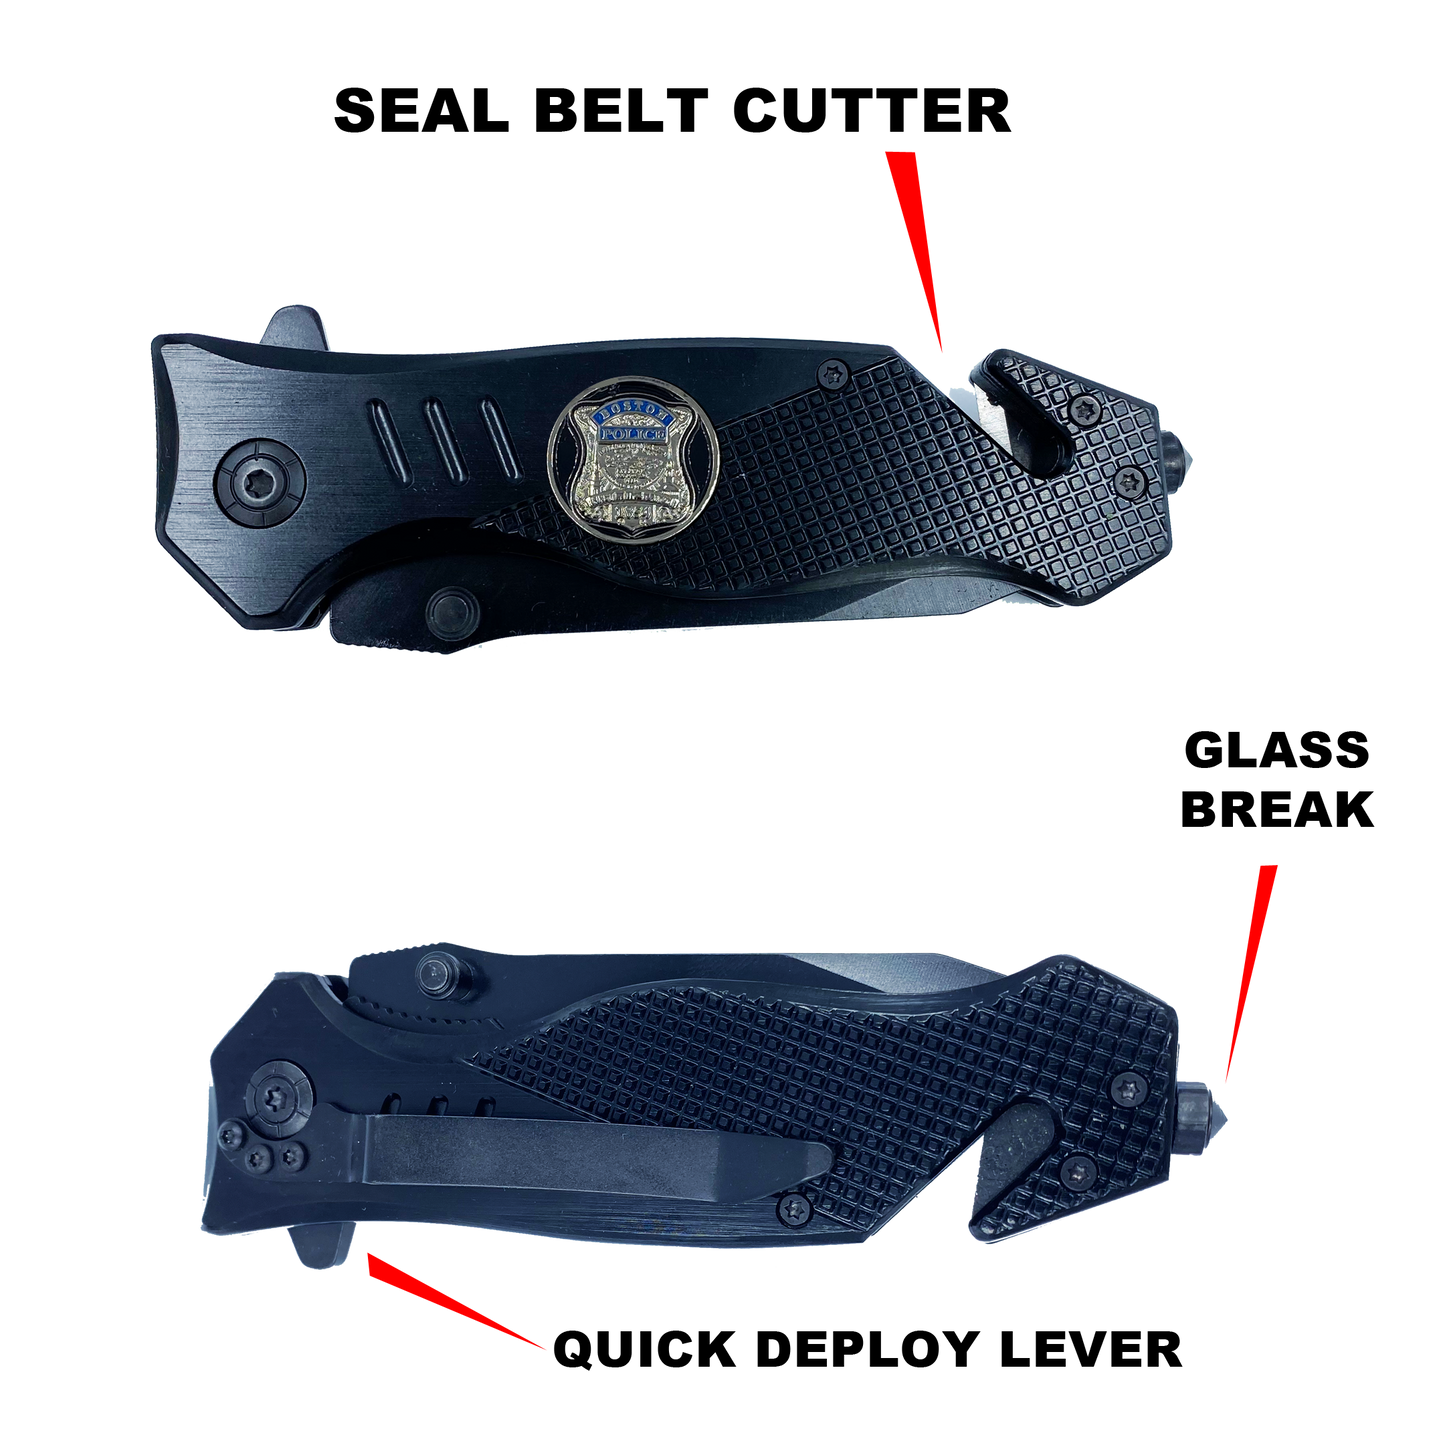 Boston Police collectible Officer 3-in-1 Police Tactical Rescue knife tool with Seatbelt Cutter, Steel Serrated Blade, Glass Breaker BPD